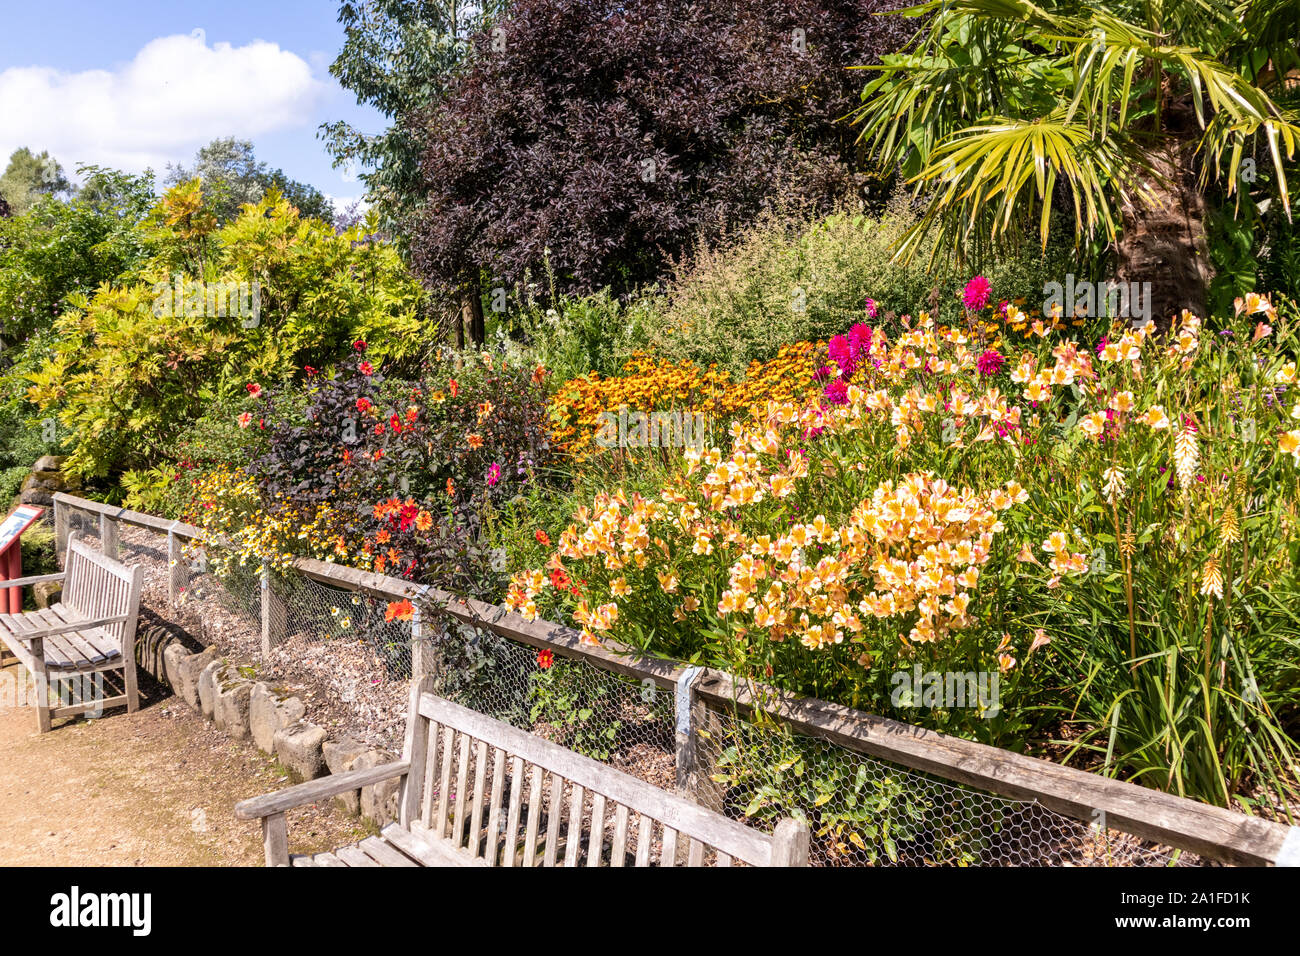 A wonderful display of summer flowers in Golden Acre Park, Leeds, West Yorkshire UK Stock Photo